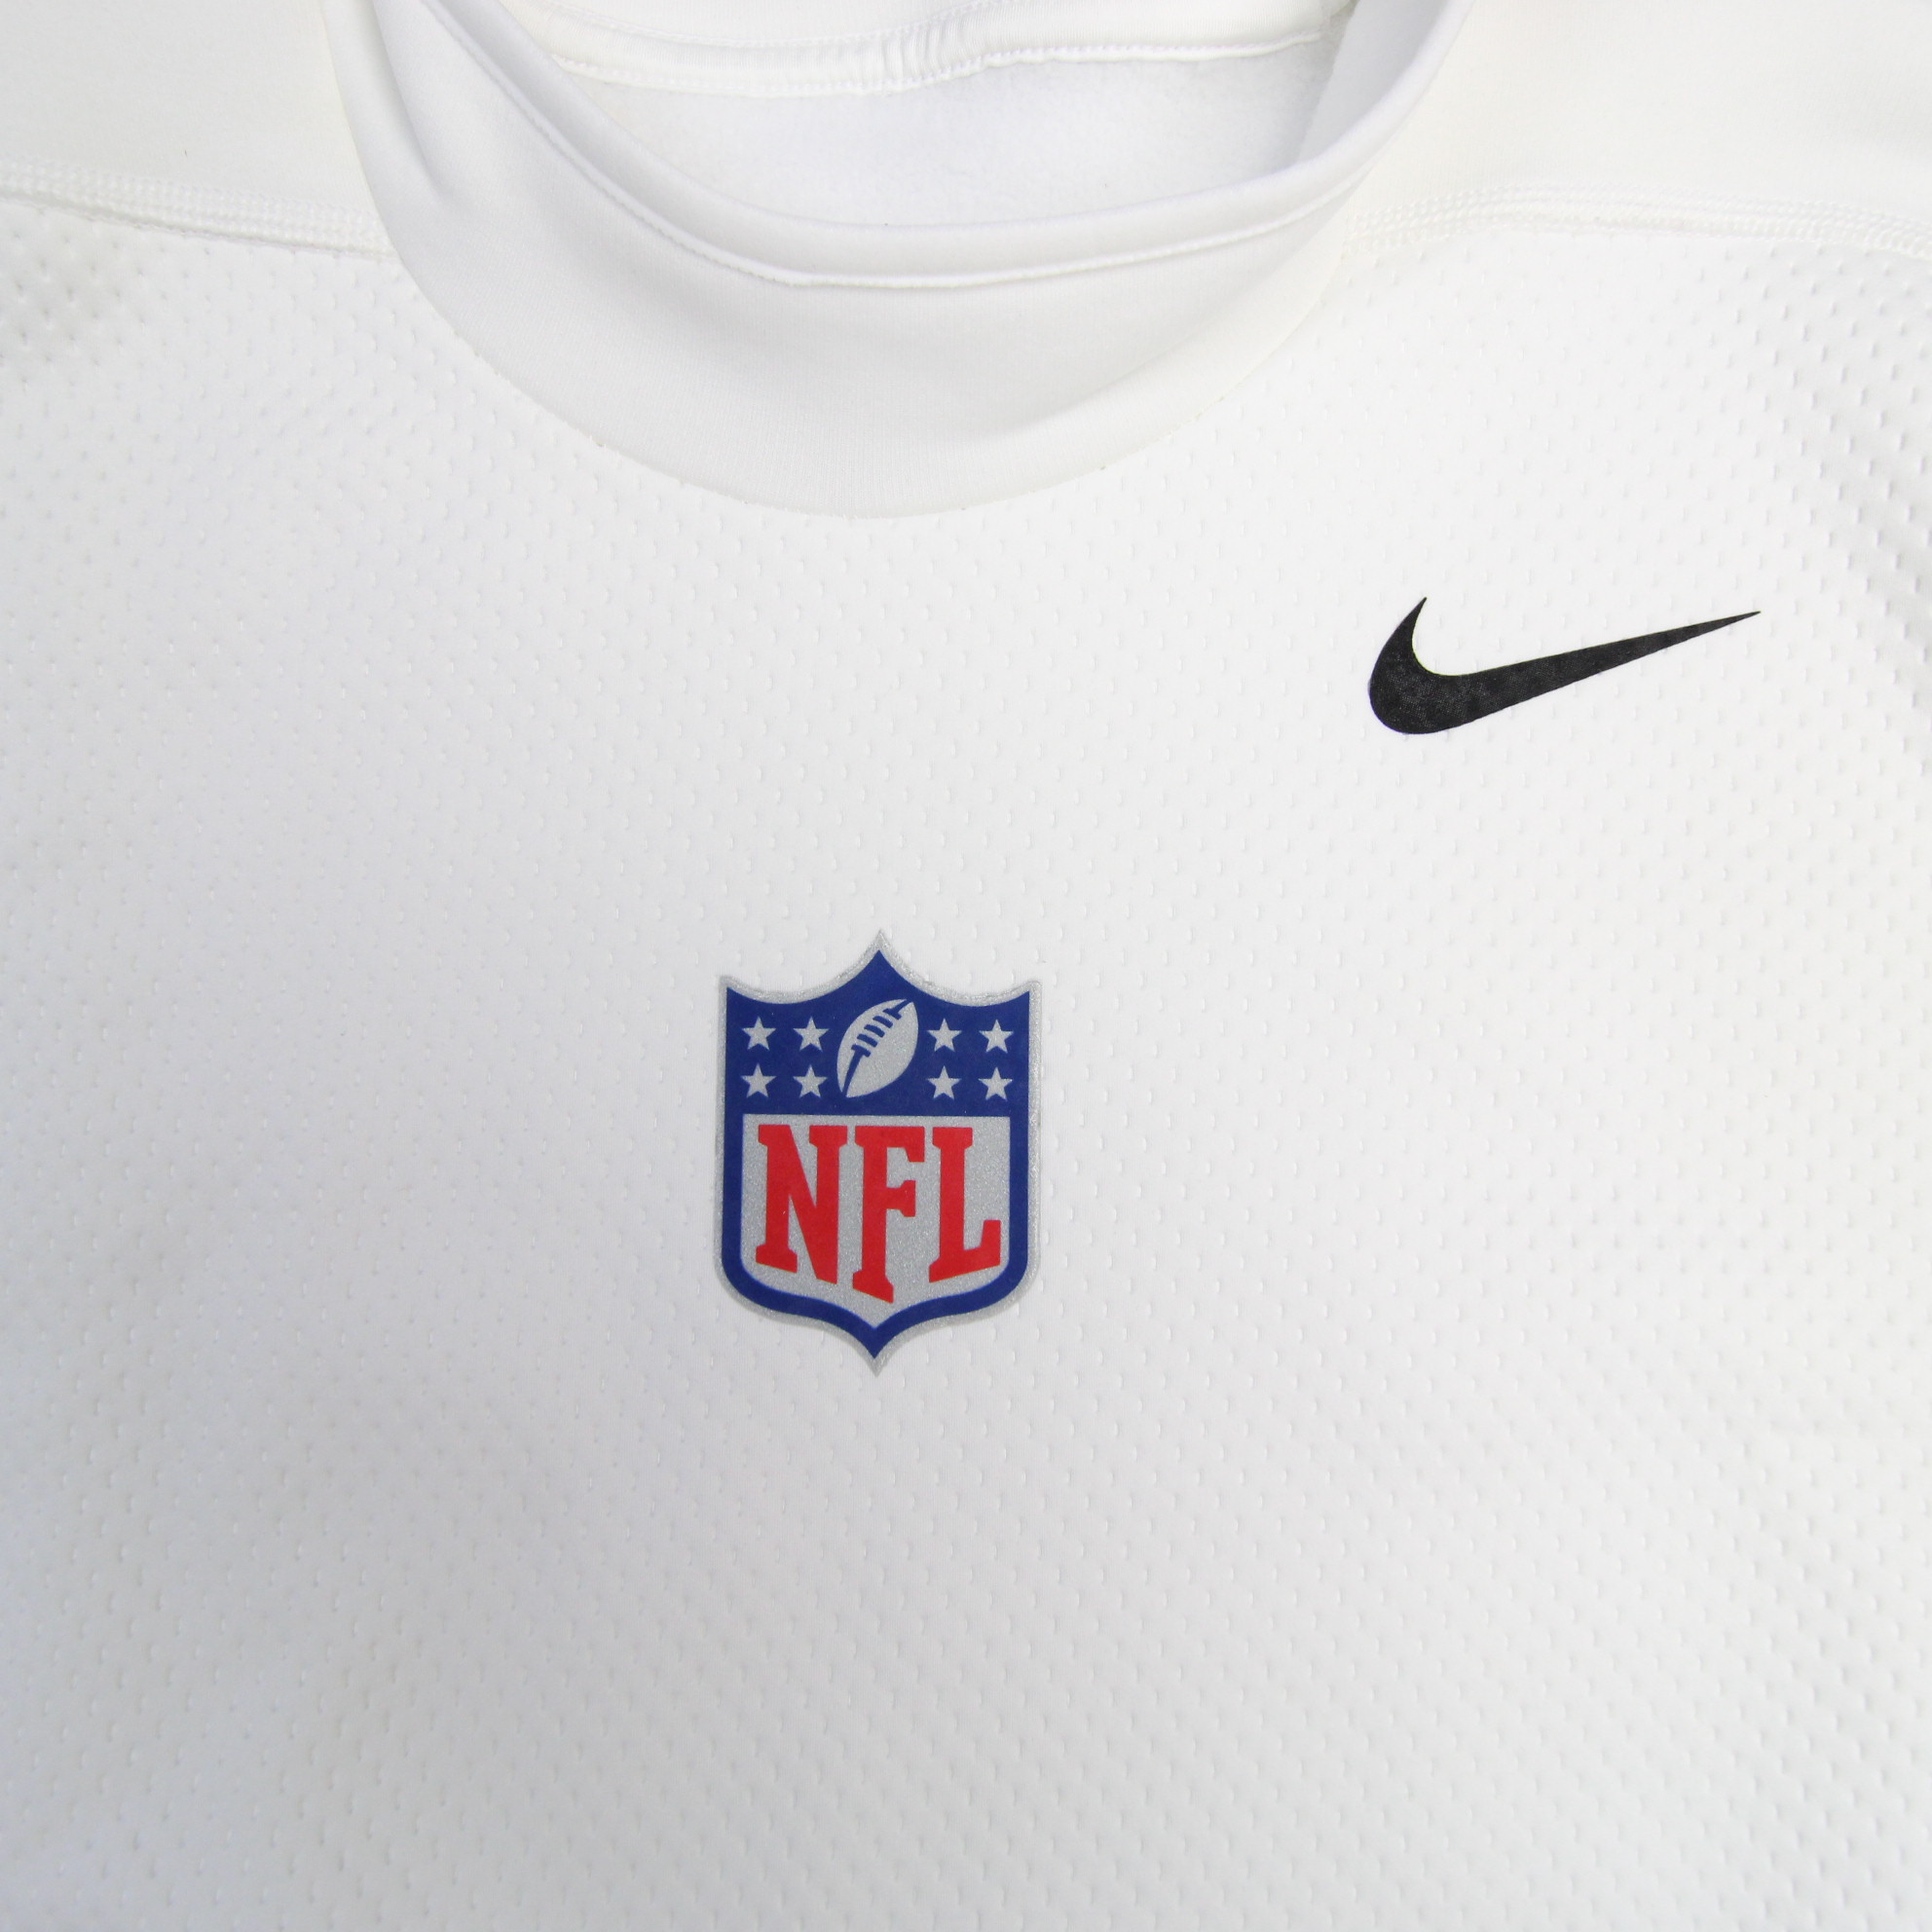 Nike NFL On Field Apparel Sleeve Shirt Men's White New without Tags | eBay